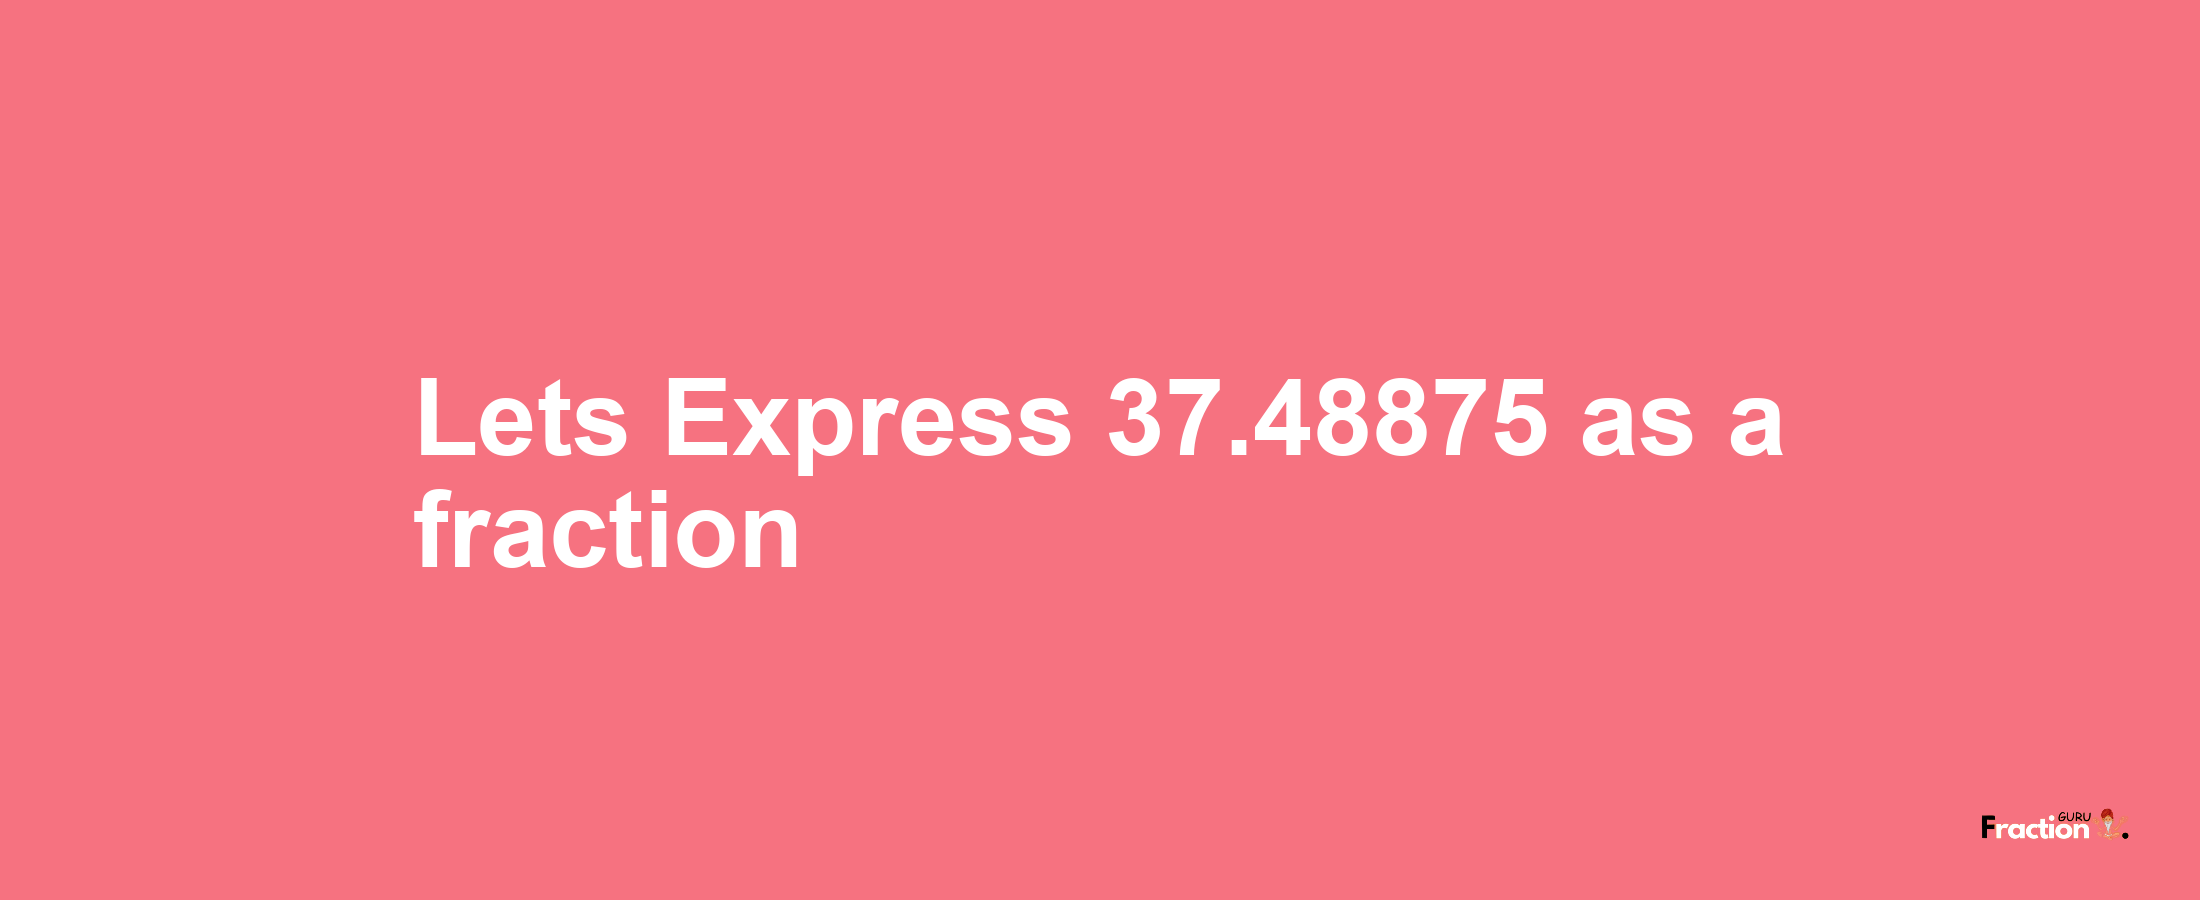 Lets Express 37.48875 as afraction